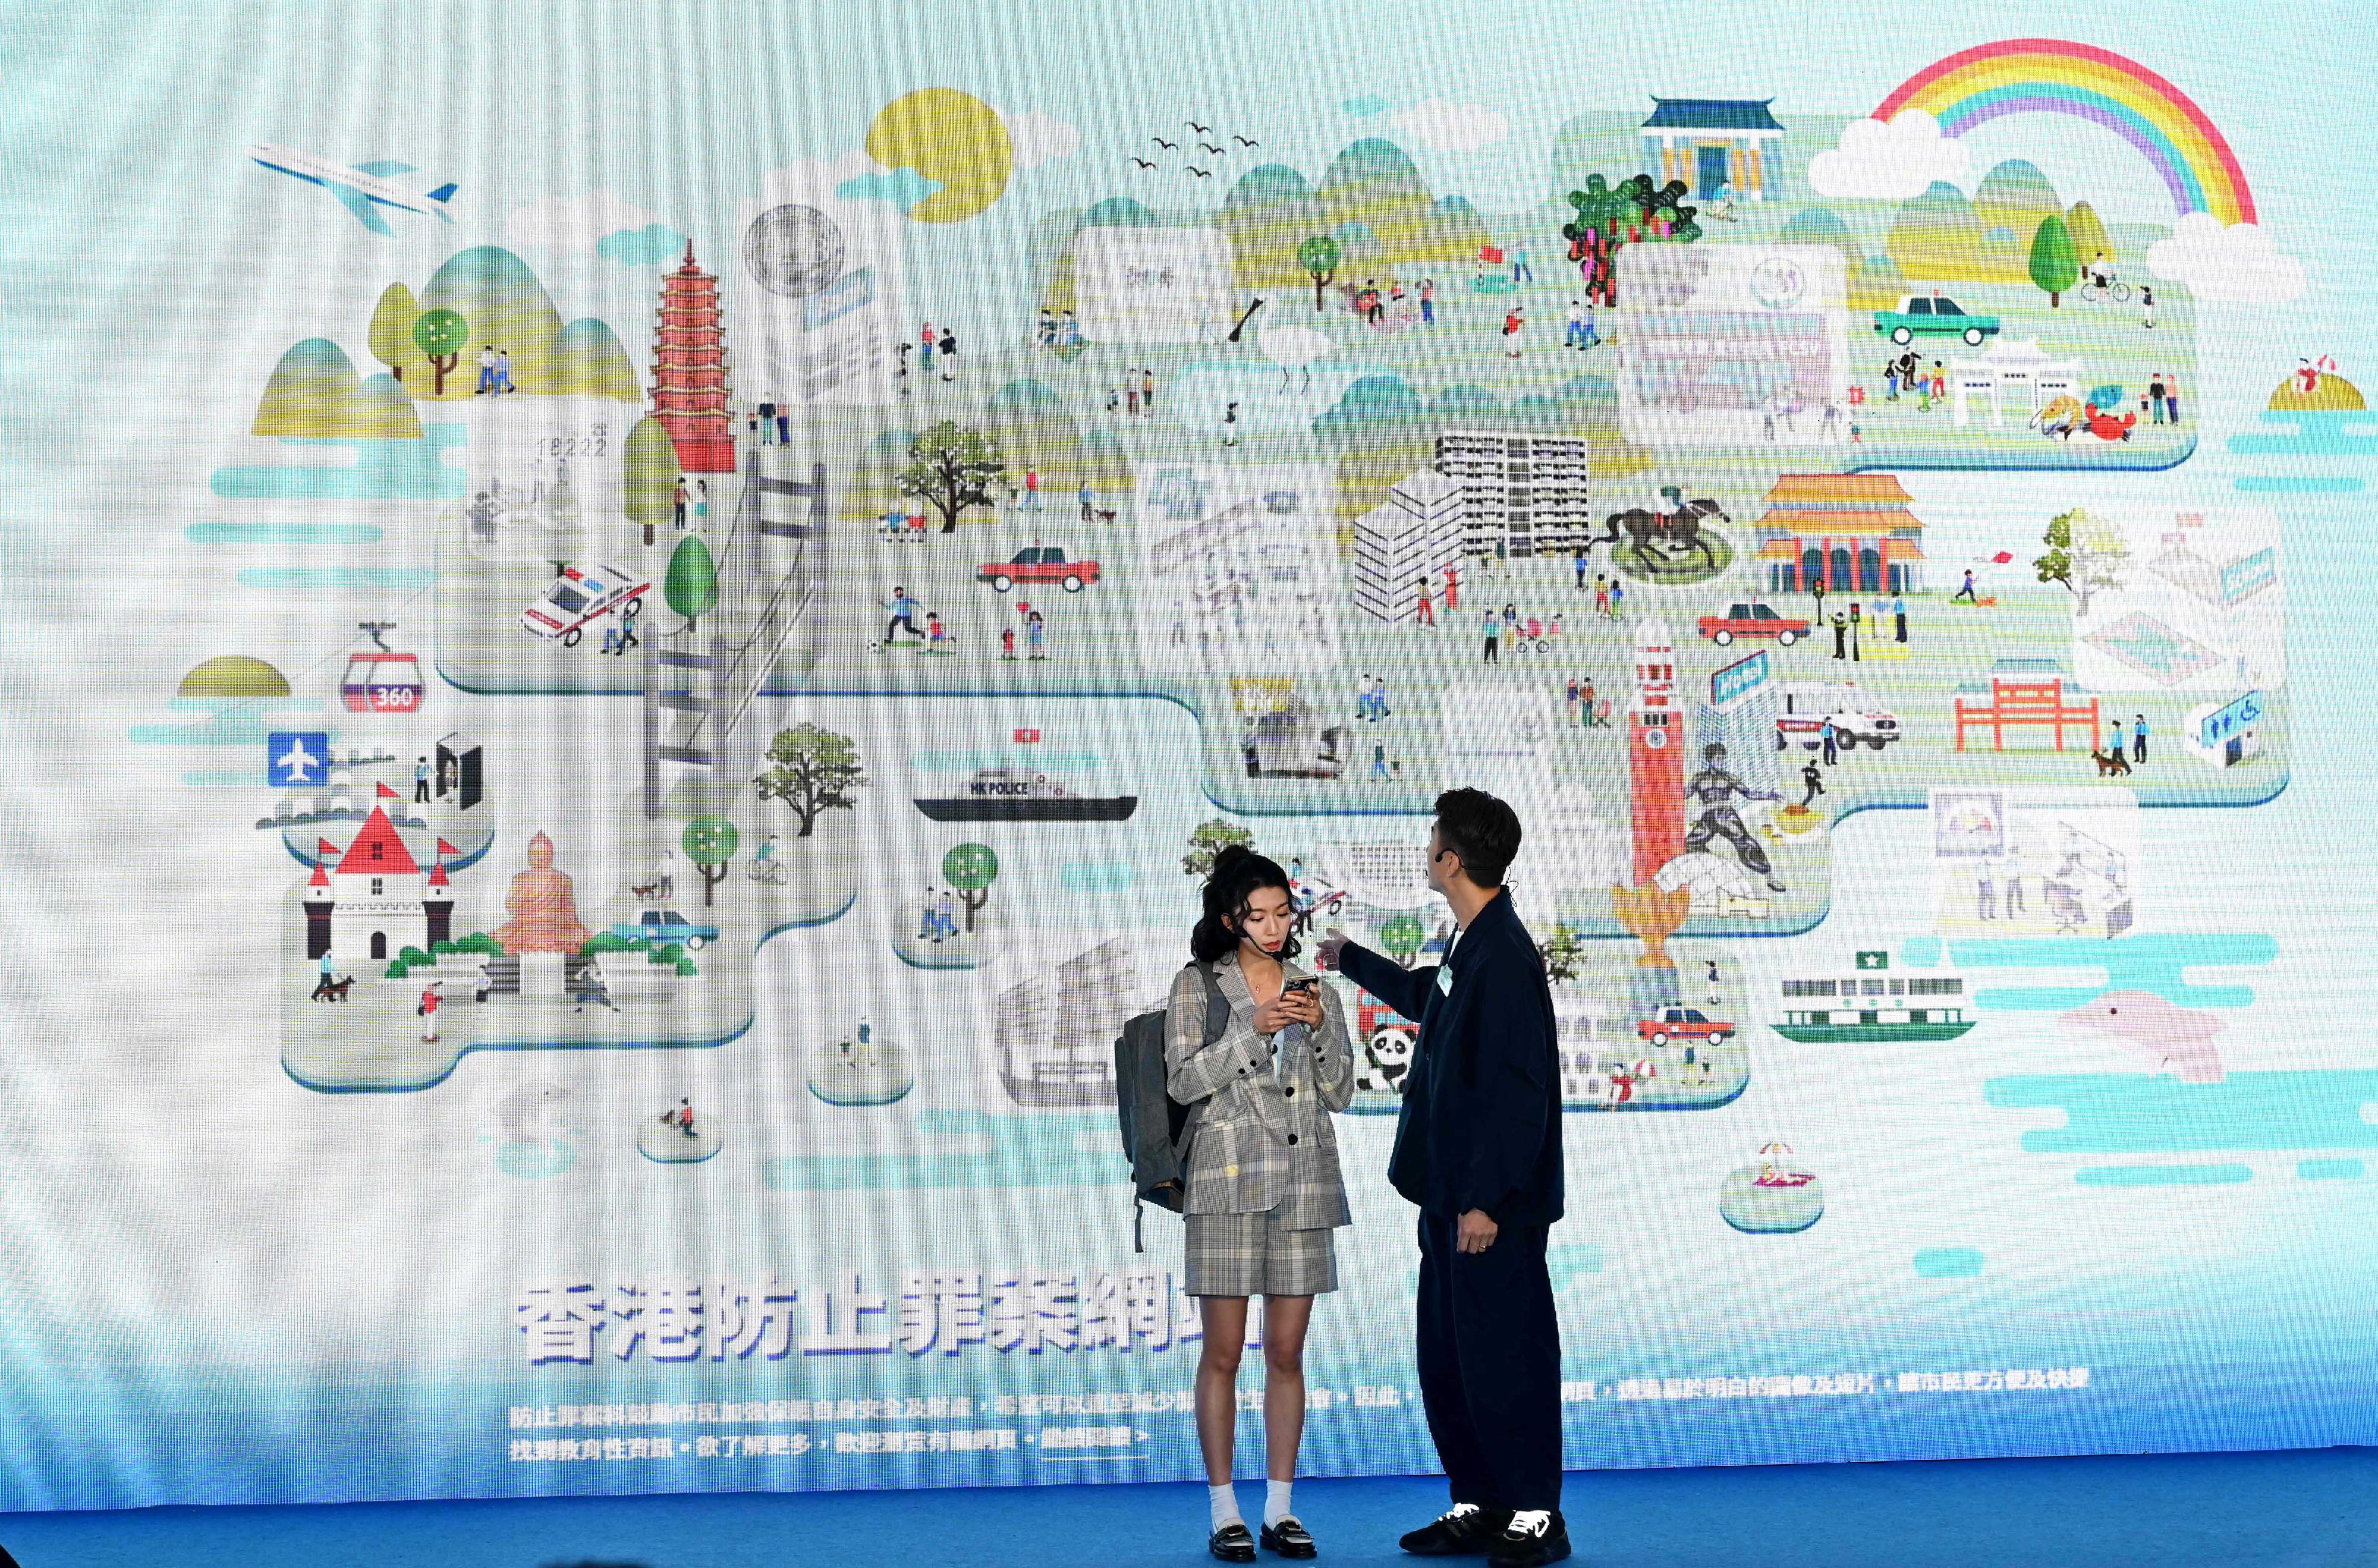 The Police Force today (May 16) launched a brand-new crime prevention website “SafeCity.HK” and appointed 47 “SafeCity Ambassadors”. Photo shows artistes Mr Benjamin Yuen (right) and Ms Sisley Choi introducing the features of the website at the launching ceremony.